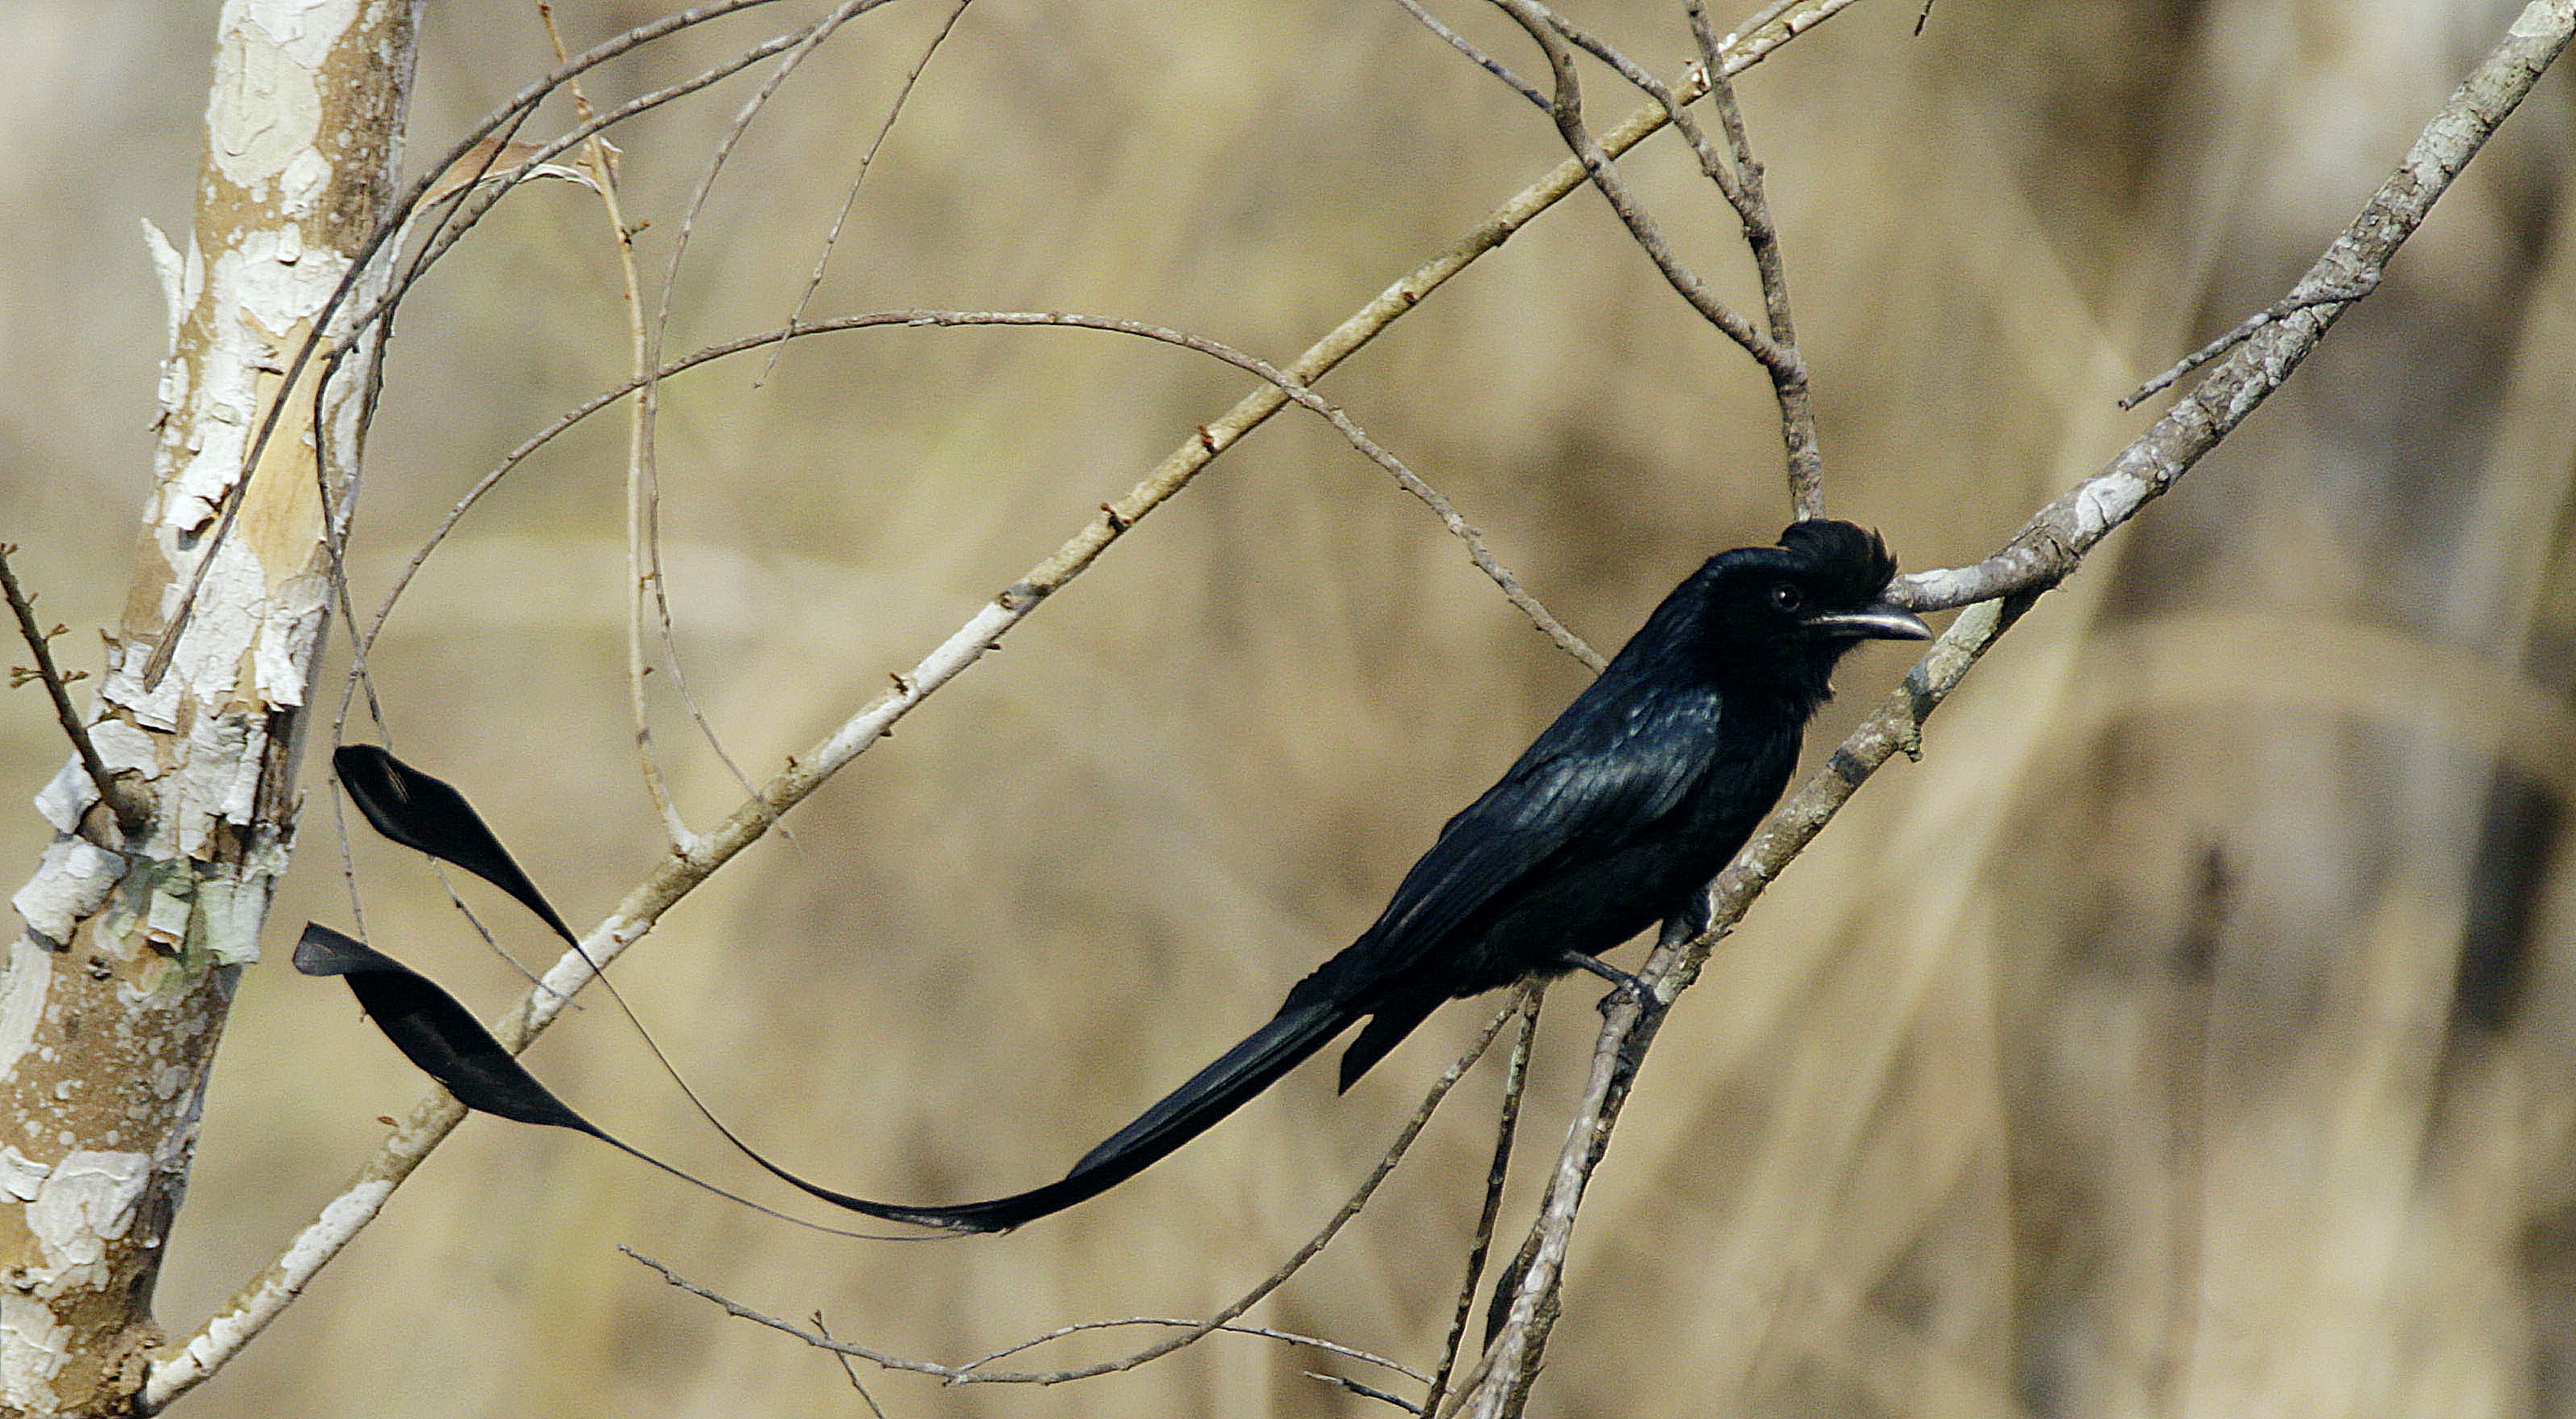 Drongo mimics alarm calls to steal food from other species, finds